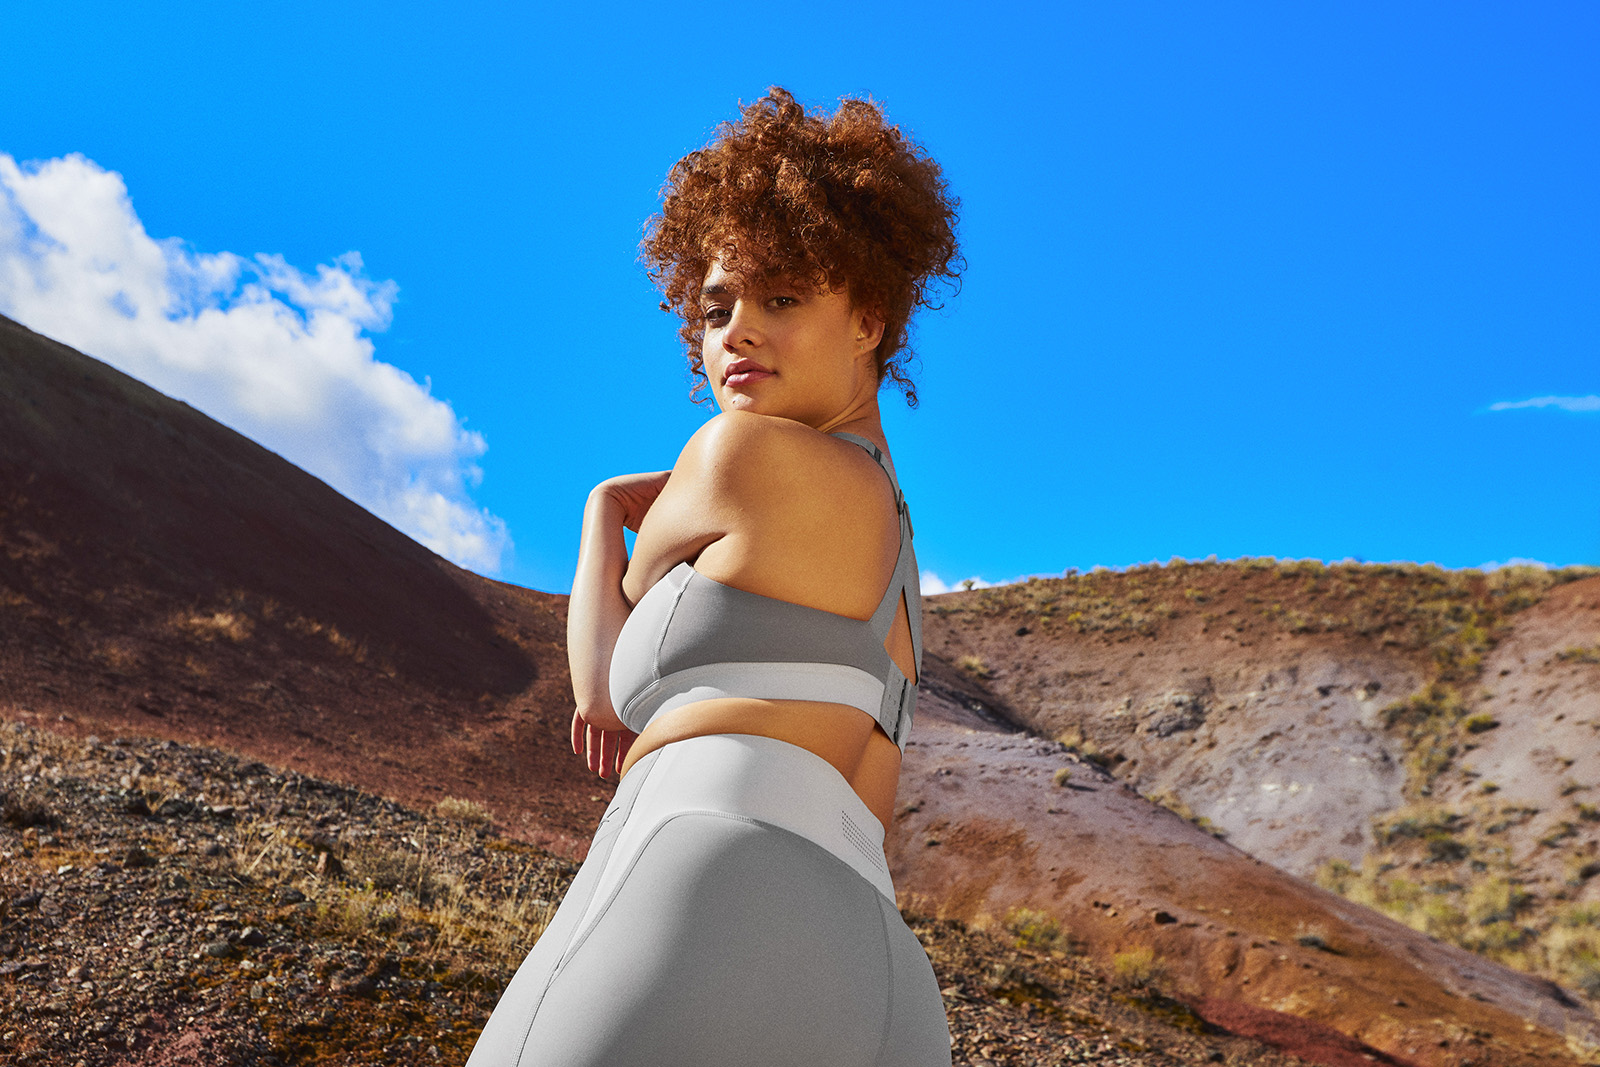 Model wearing gray bra and tights stretches her shoulder, standing on a red earth hill with brilliant blue sky behind her.